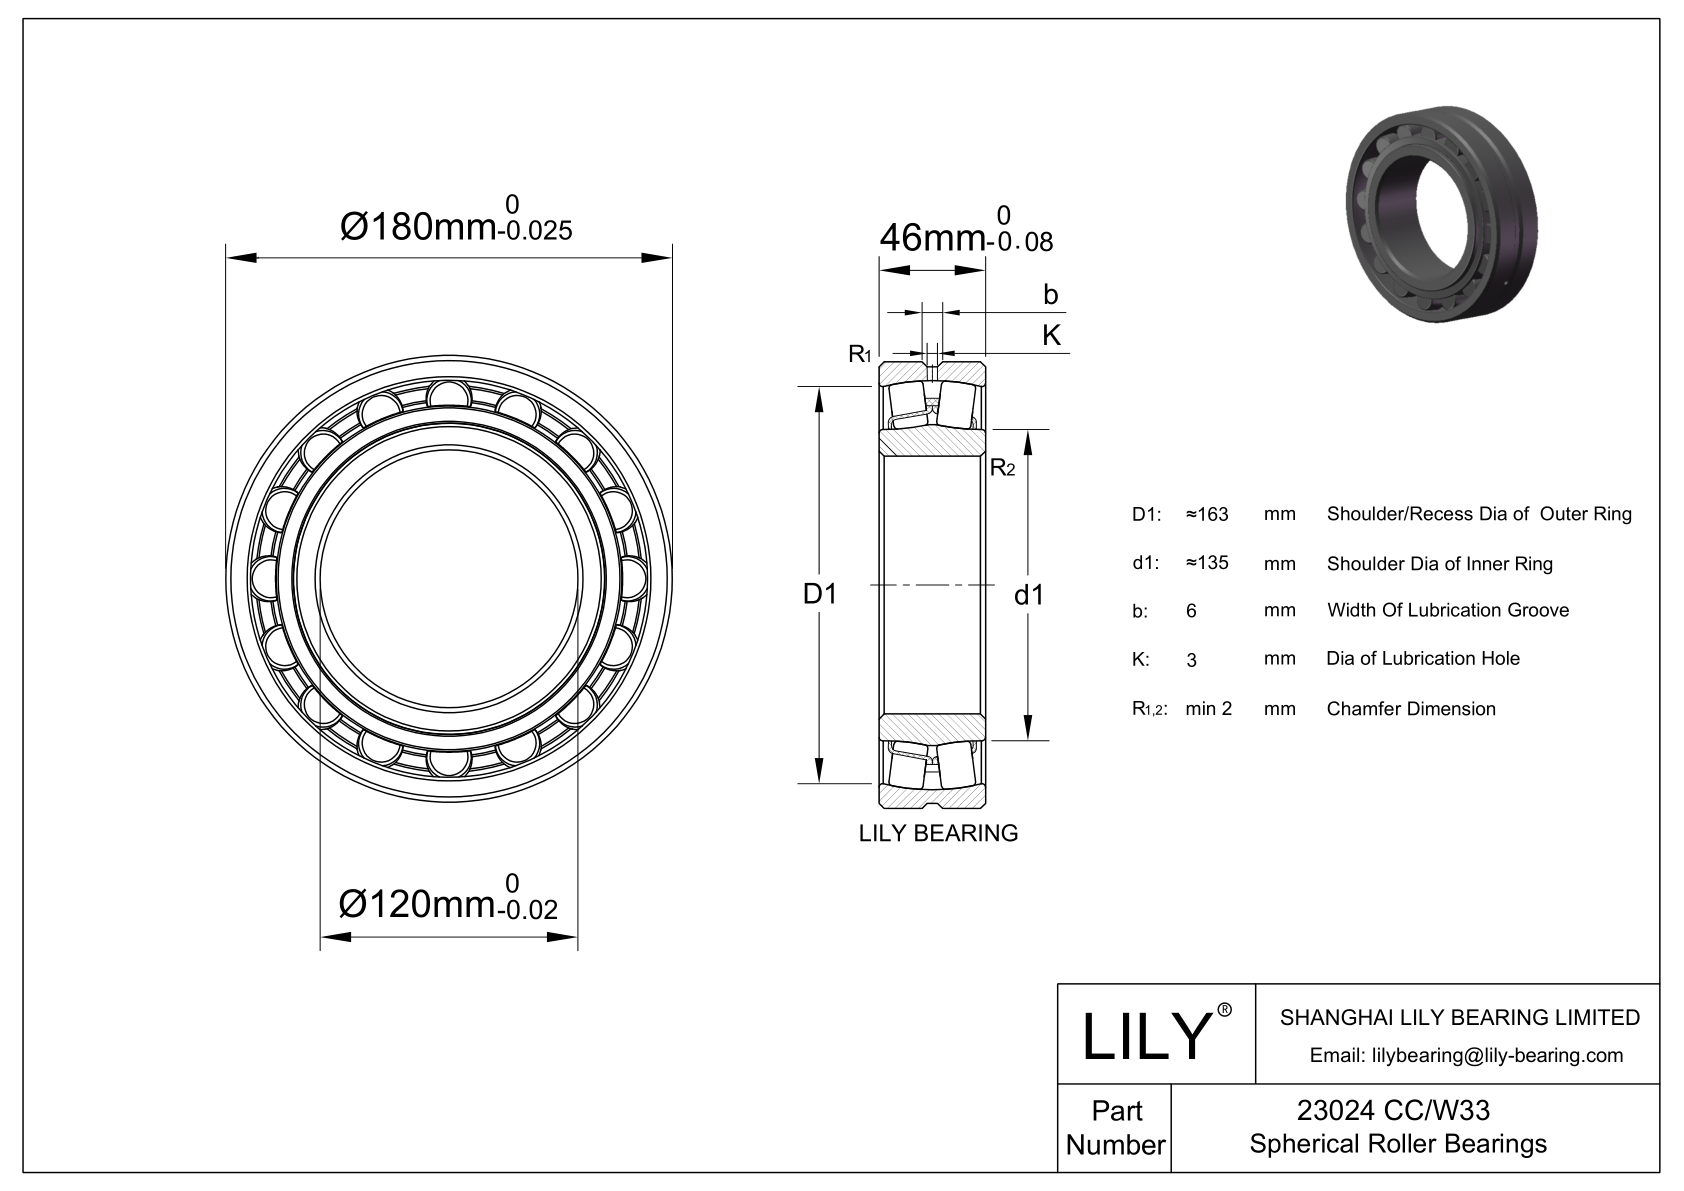 23024 CC/W33 Double Row Spherical Roller Bearing cad drawing